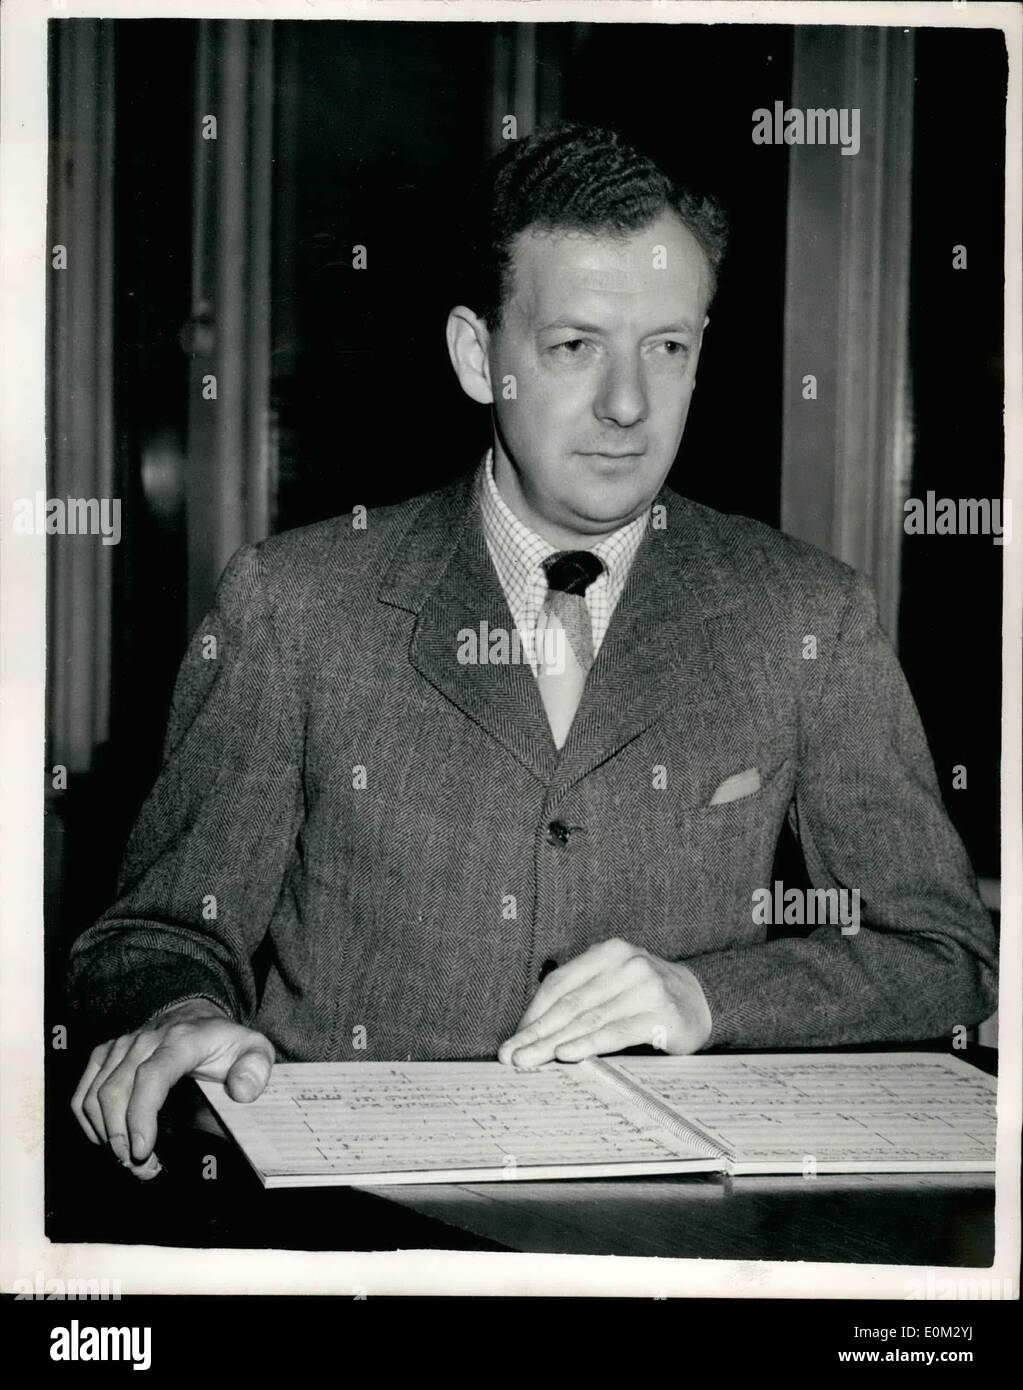 Apr. 14, 1953 - 14-4-53 Benjamin Britten with his Coronation Opera score. Working at Covent Garden. Mr. Benjamin Britten the famous British composer was to be seen at Covent Garden Opera House this afternoon, working on his new Coronation Opera . Keystone Photo Shows: Benjamin Britten seen with the score of his new work at the Opera House this afternoon. Stock Photo